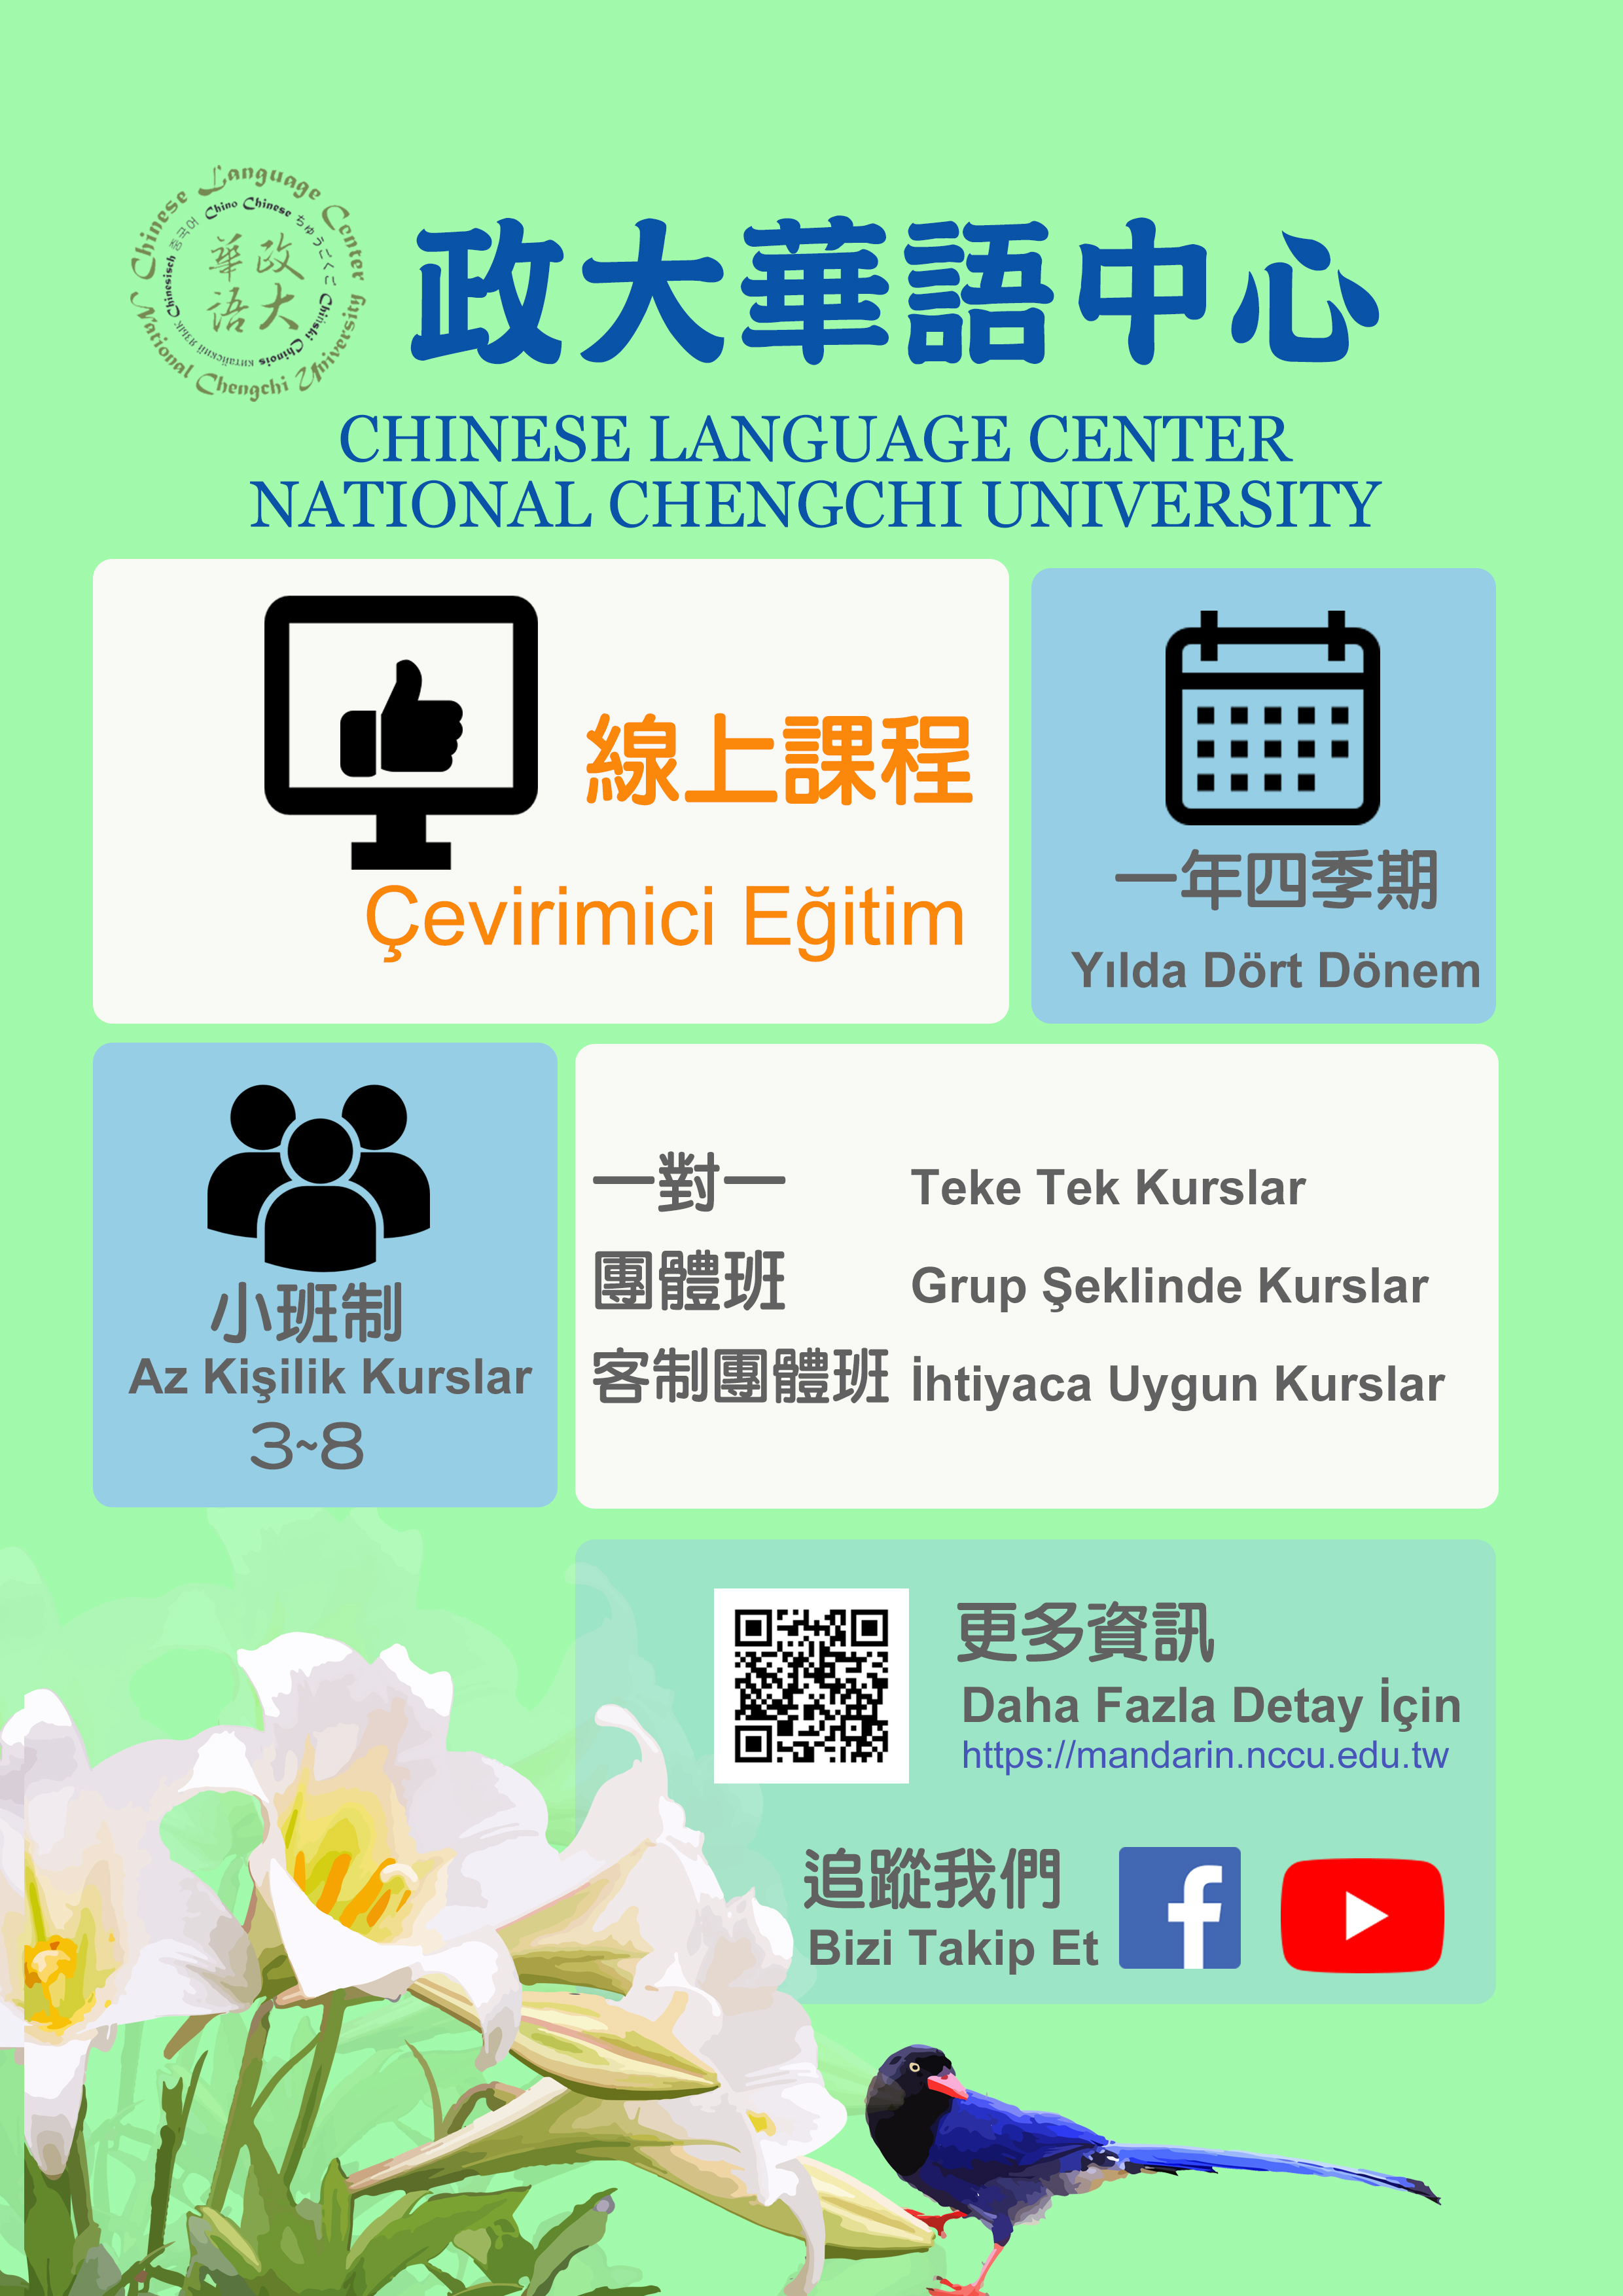 NCCU Chinese Center (Online course information)